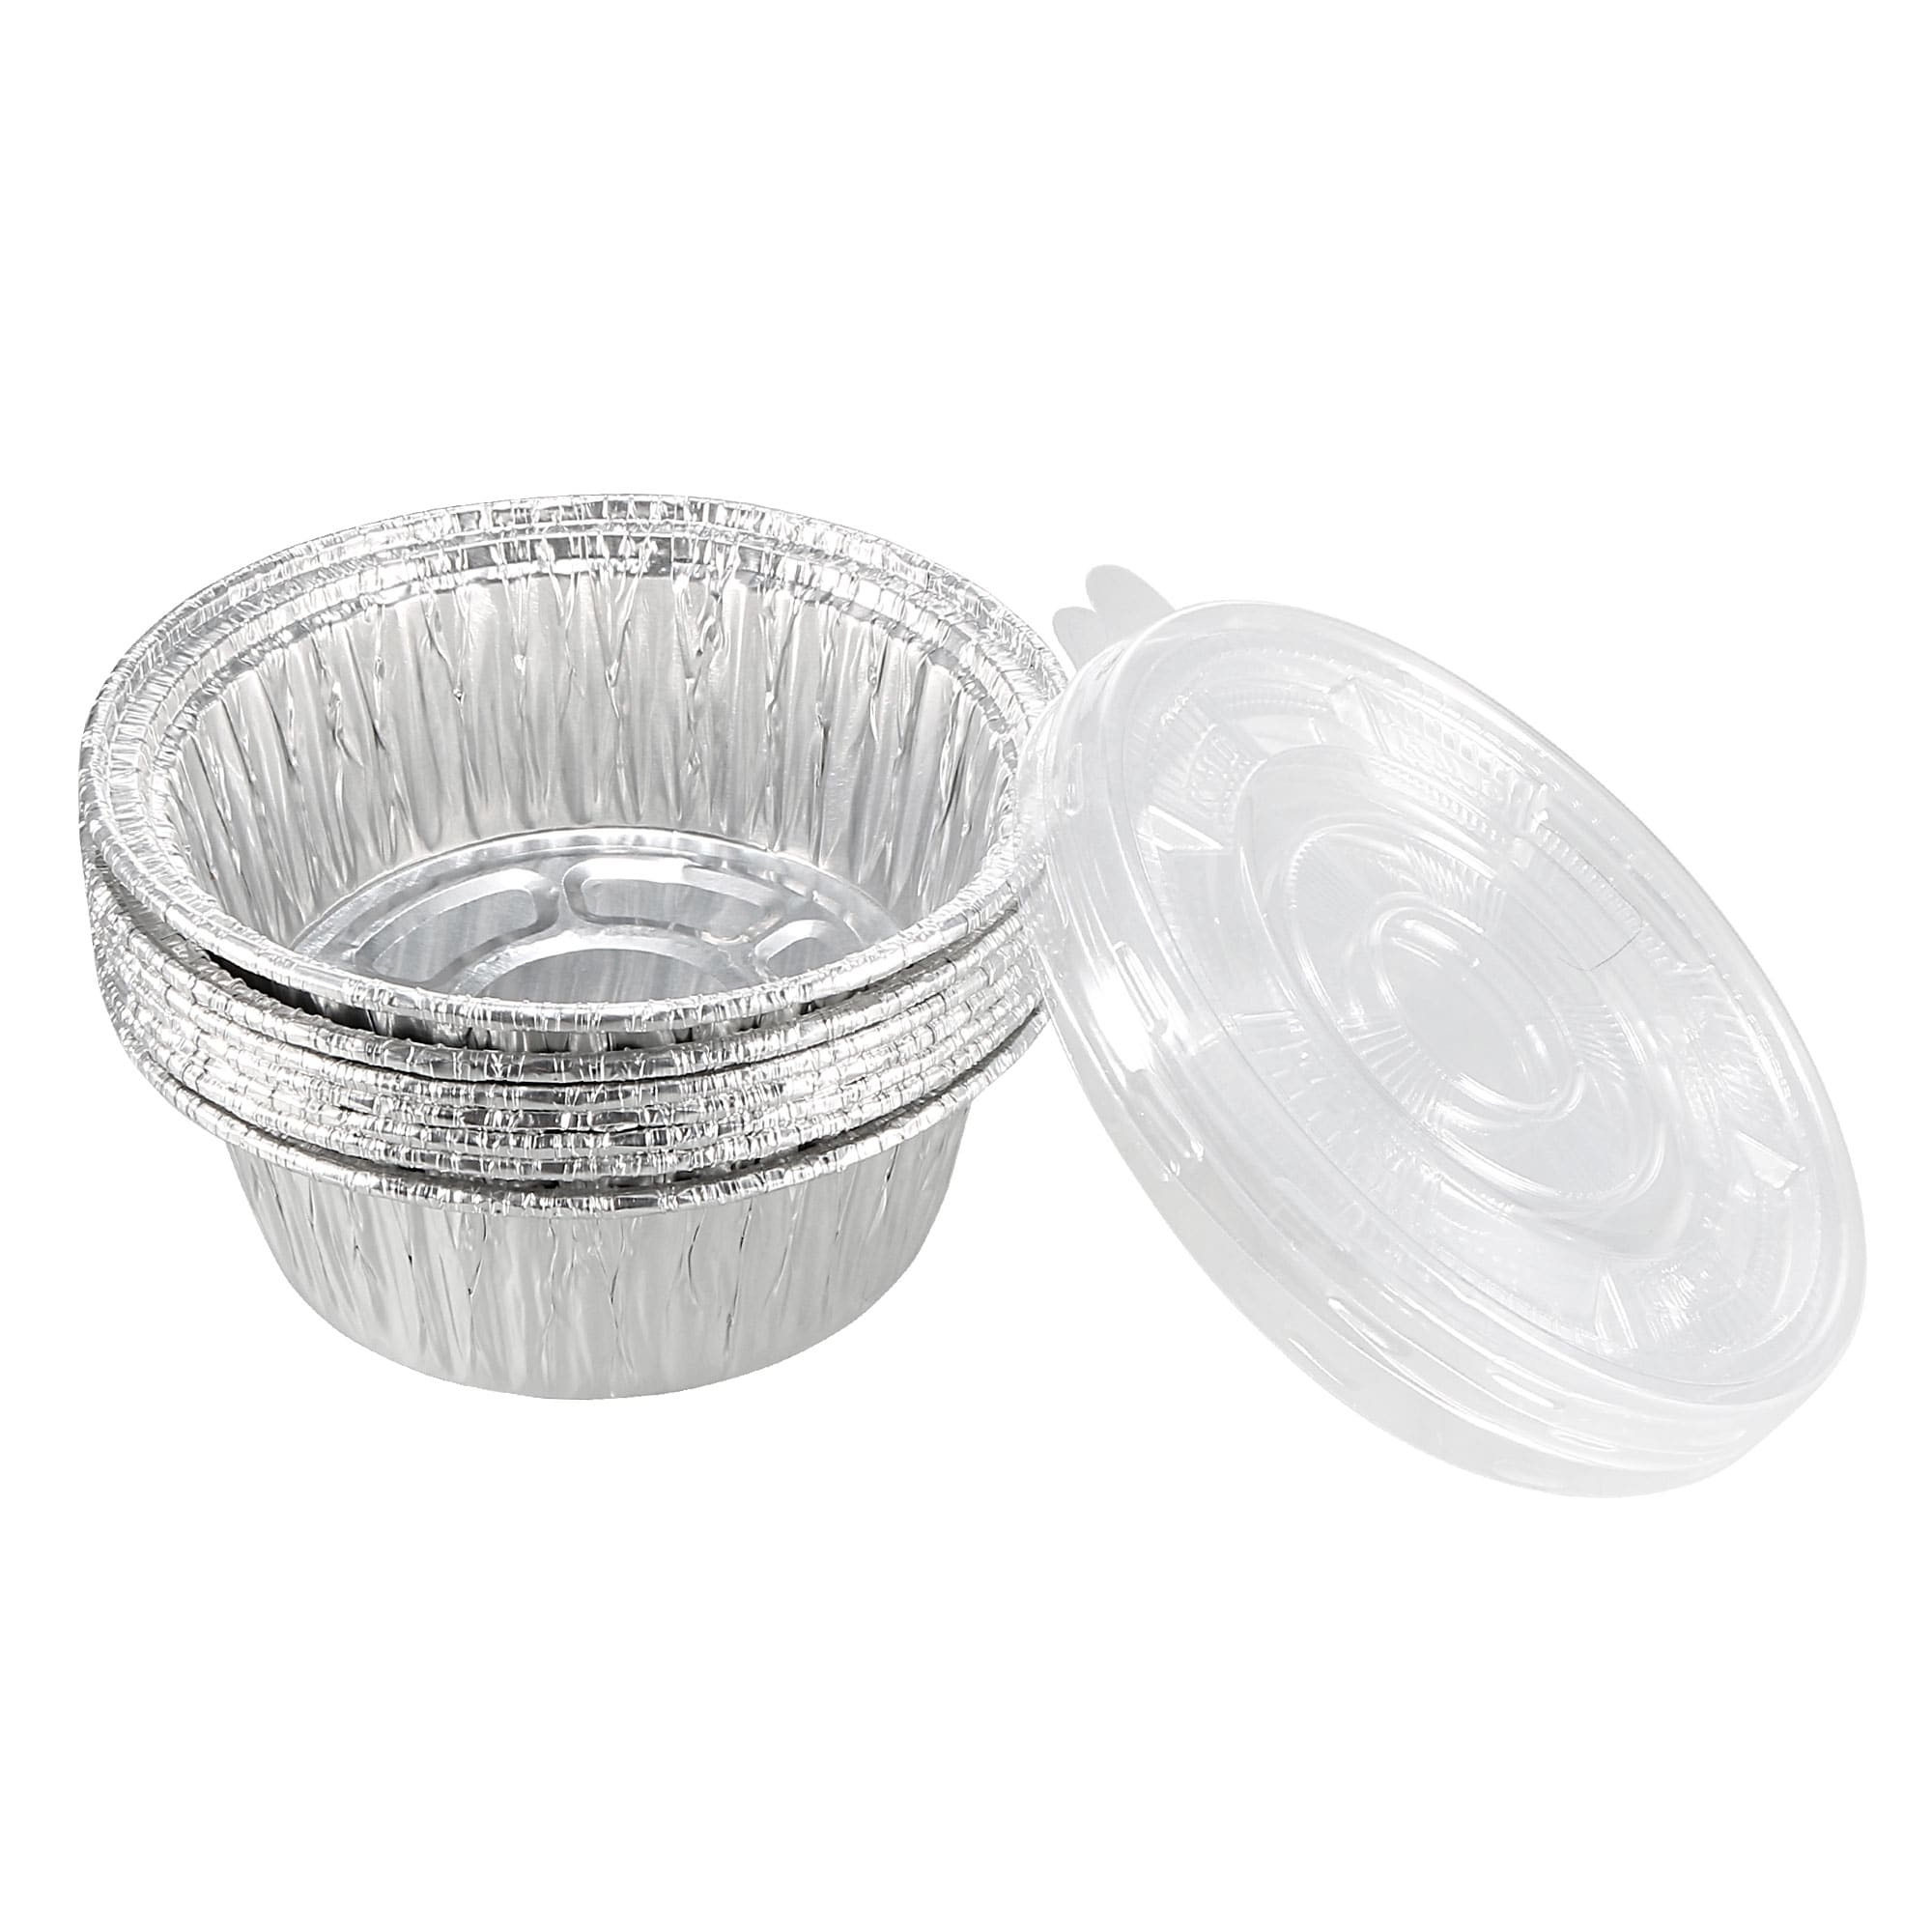 4.8 Round Aluminum Foil Pan with Clear Lid, 8.8oz Disposable